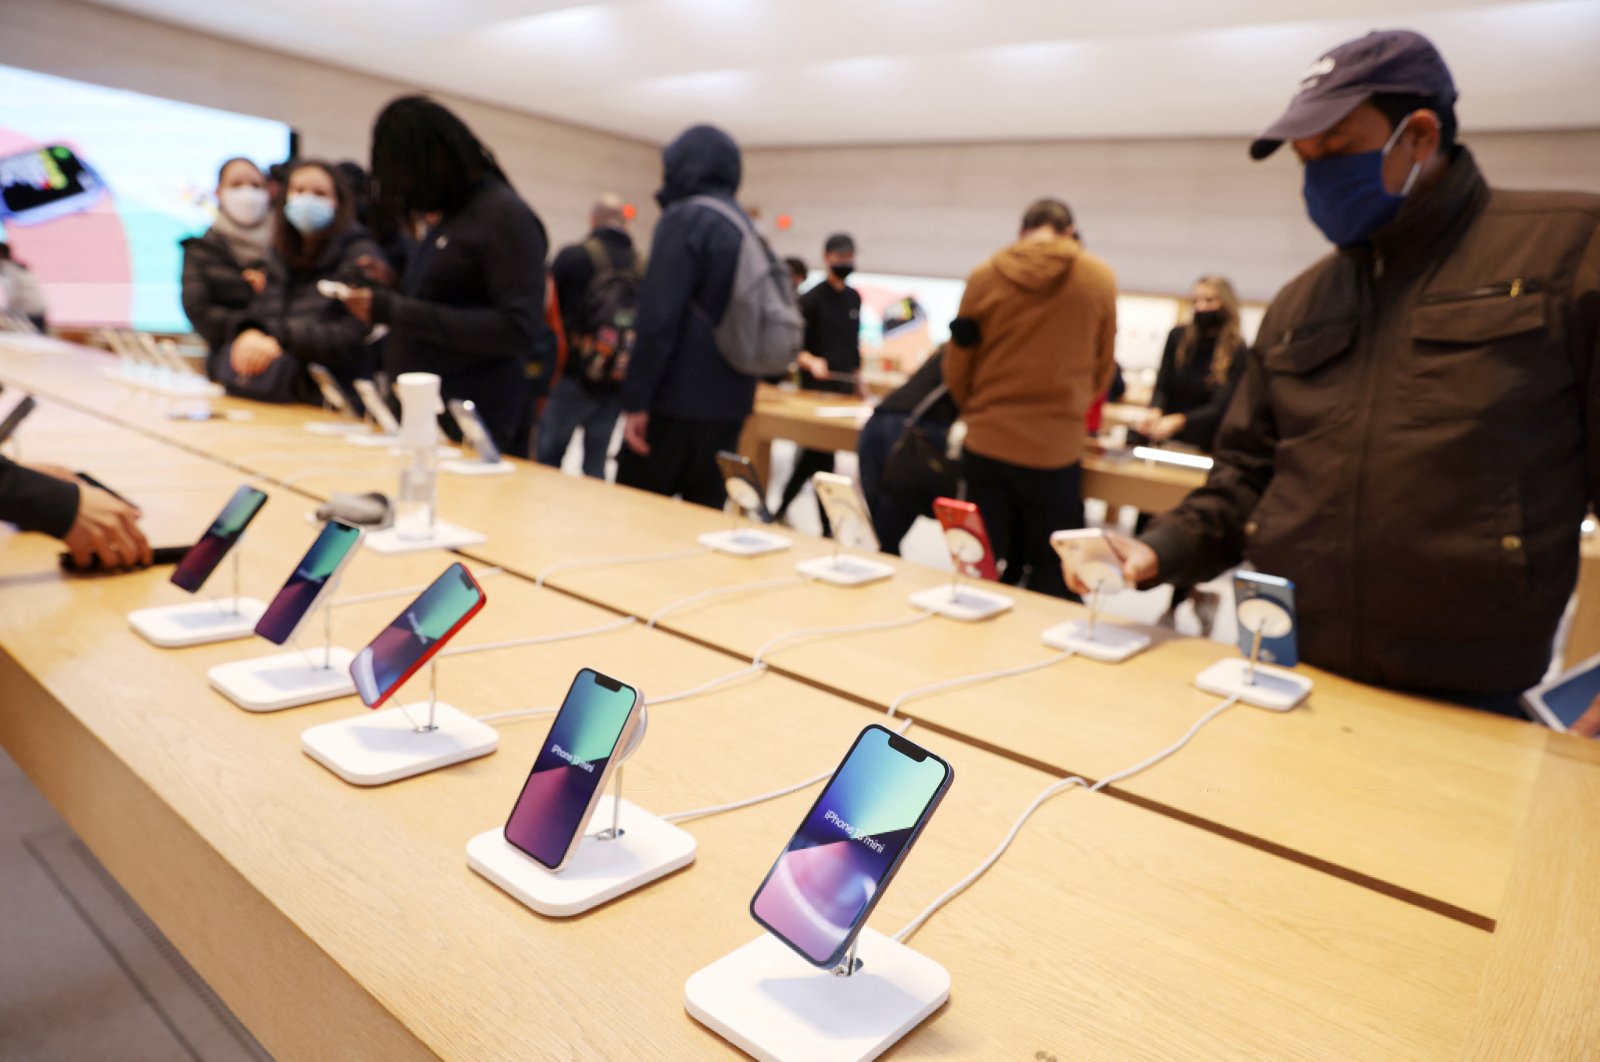 People shop for smartphones in an Apple Store in Manhattan, New York City, U.S., Feb. 11, 2022. (Reuters Photo)